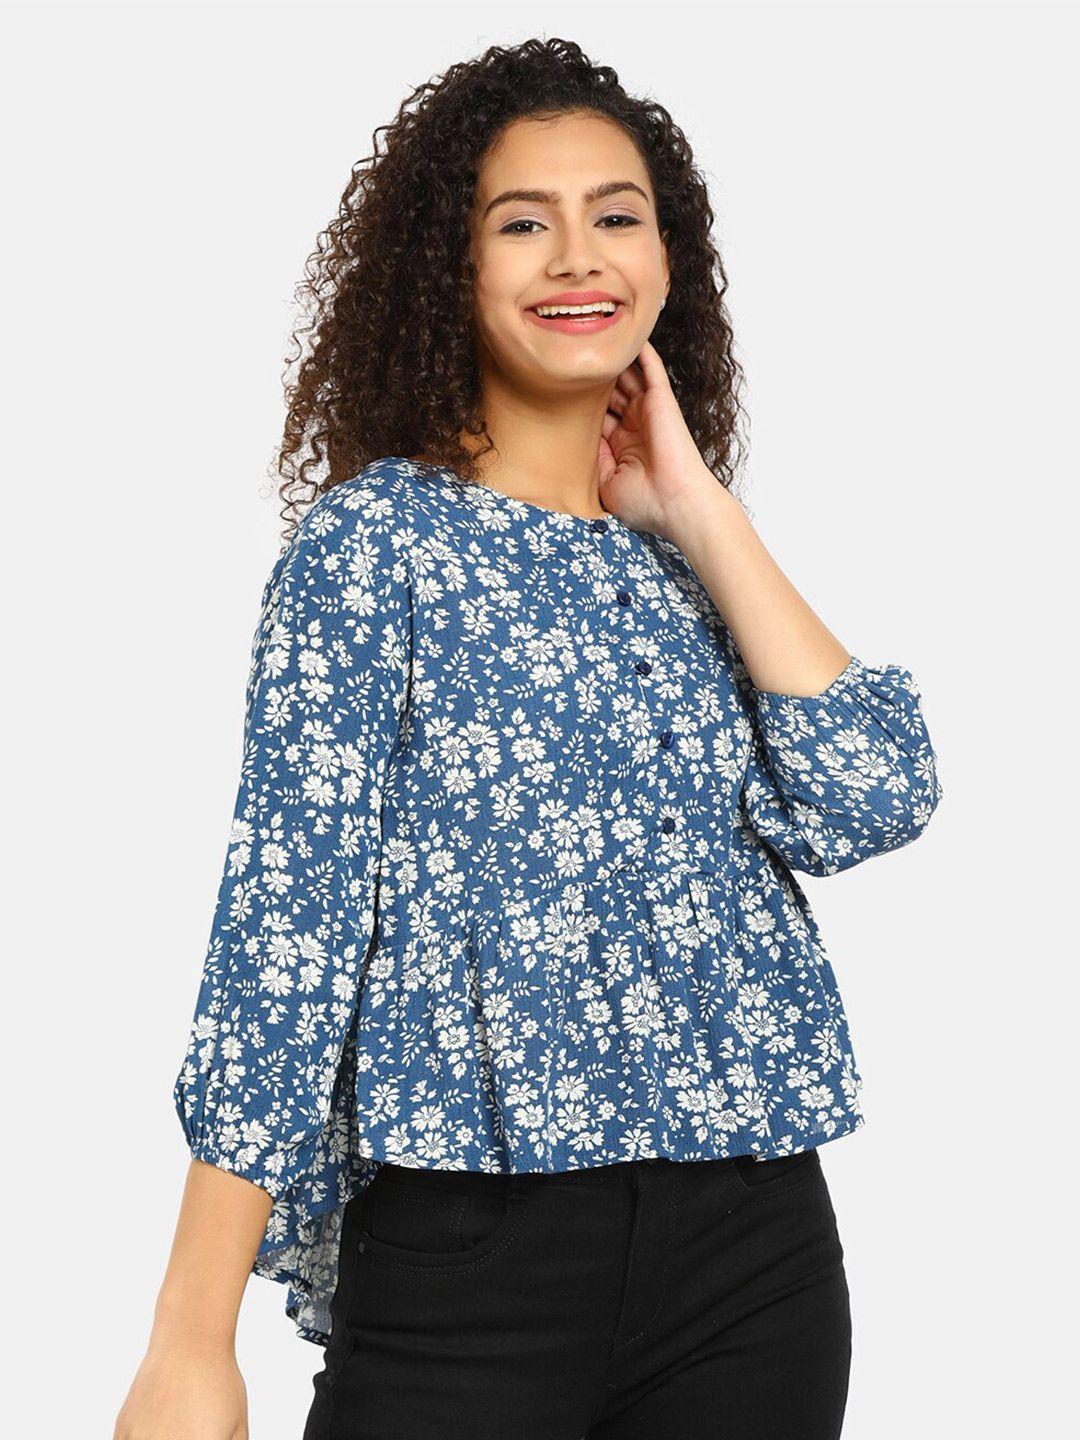 v-mart teal & white pure cotton floral print top